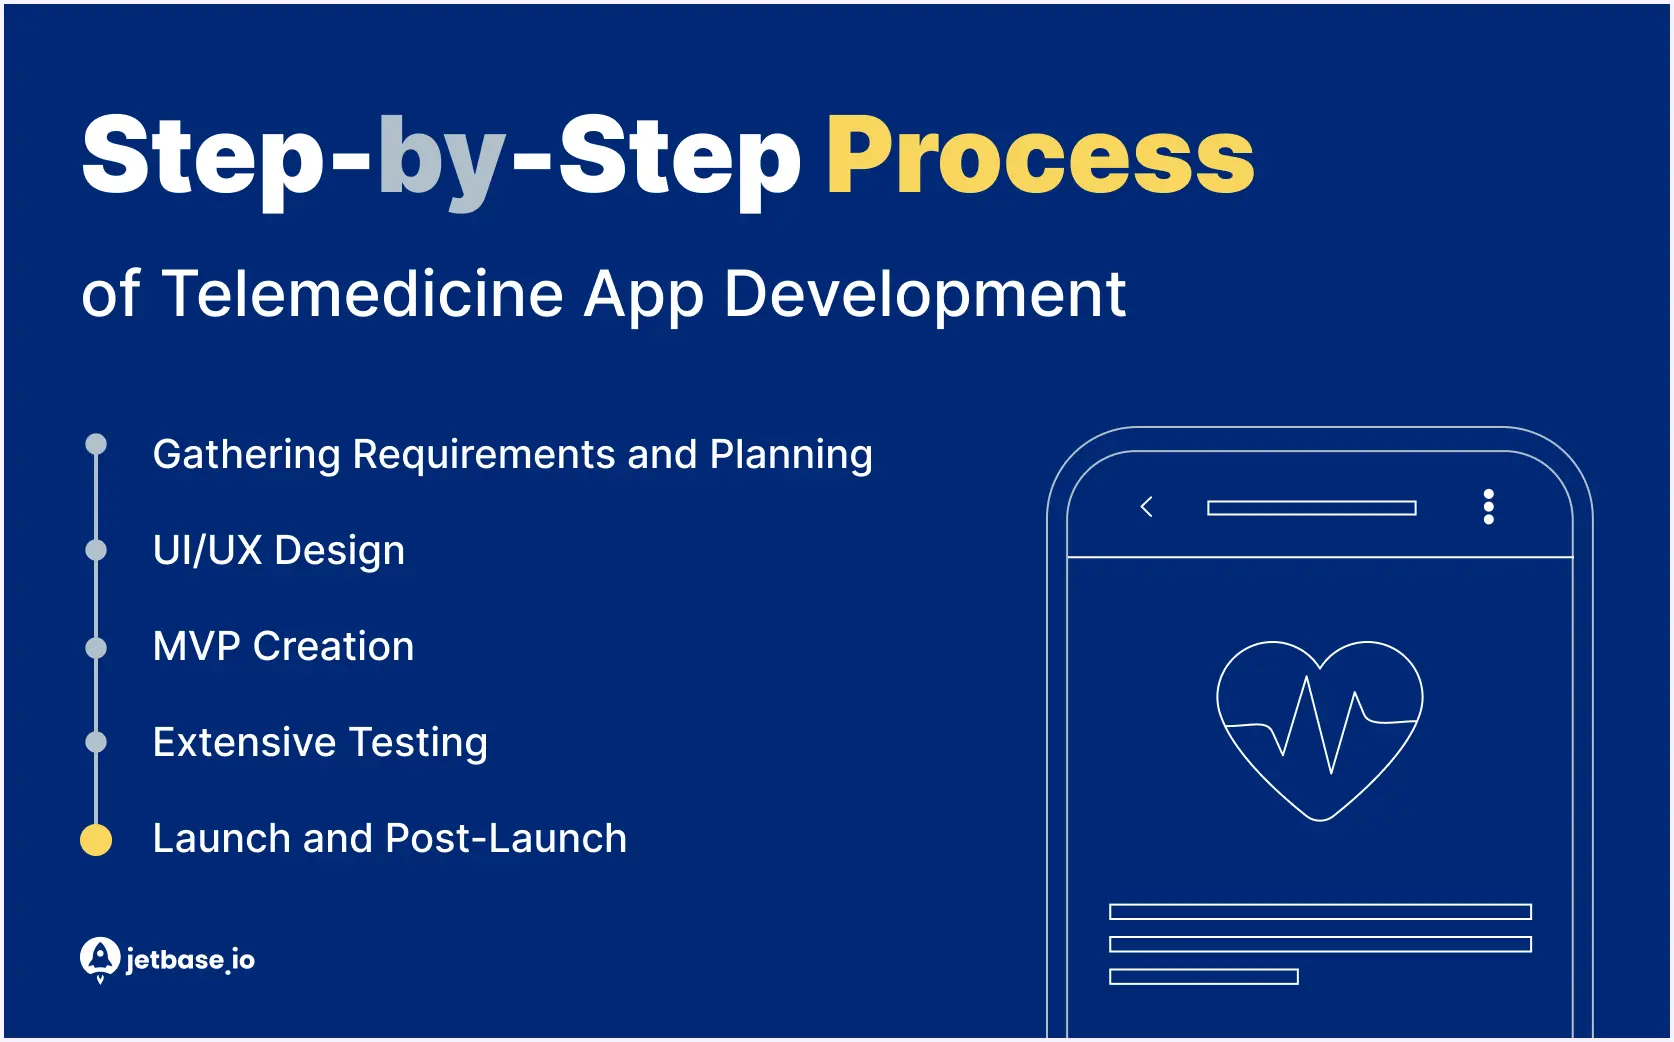 Step-by-Step Process for Developing a Telemedicine App